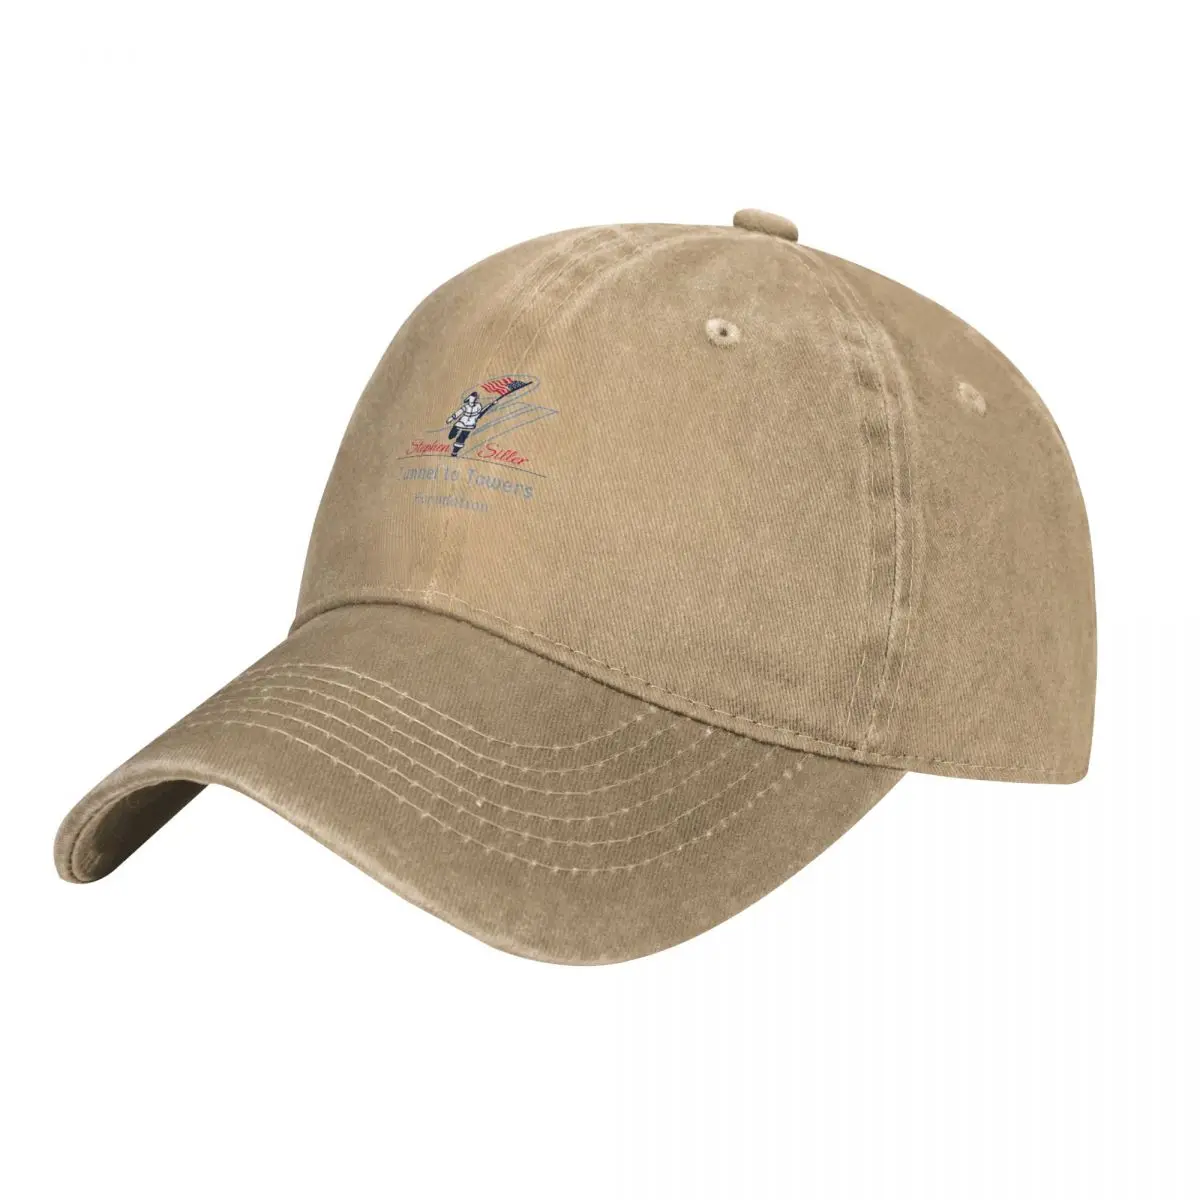 

New Disco Elysium - Something Beautiful no text Cap Cowboy Hat hat man for the sun Mountaineering ny cap sun hat mens caps